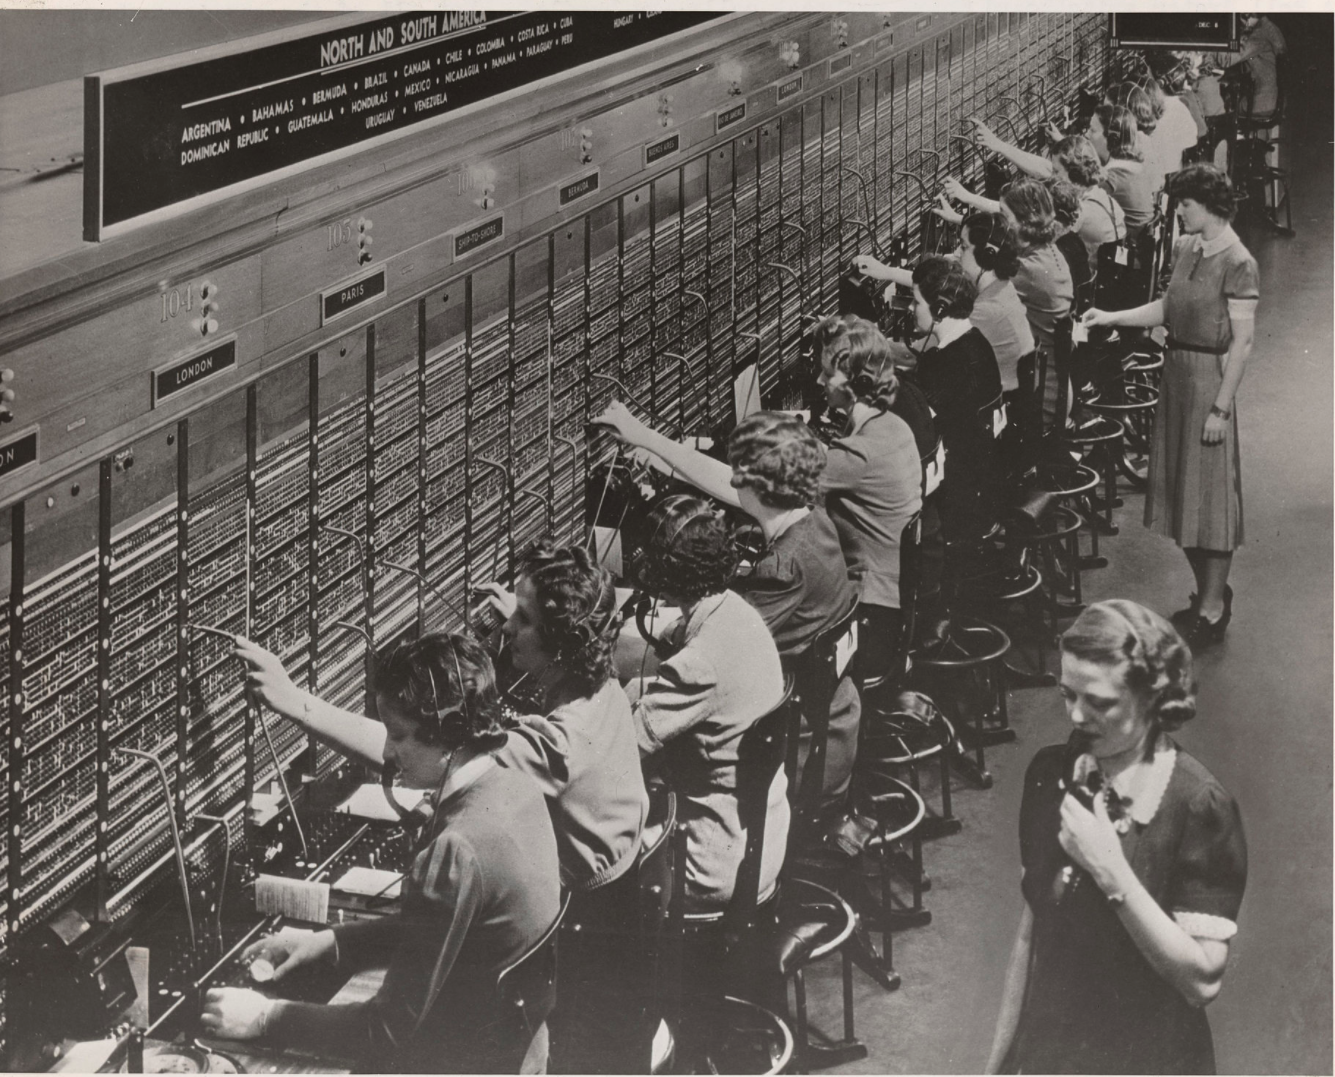 A manual international telephone switchboard and its operators in 1943.